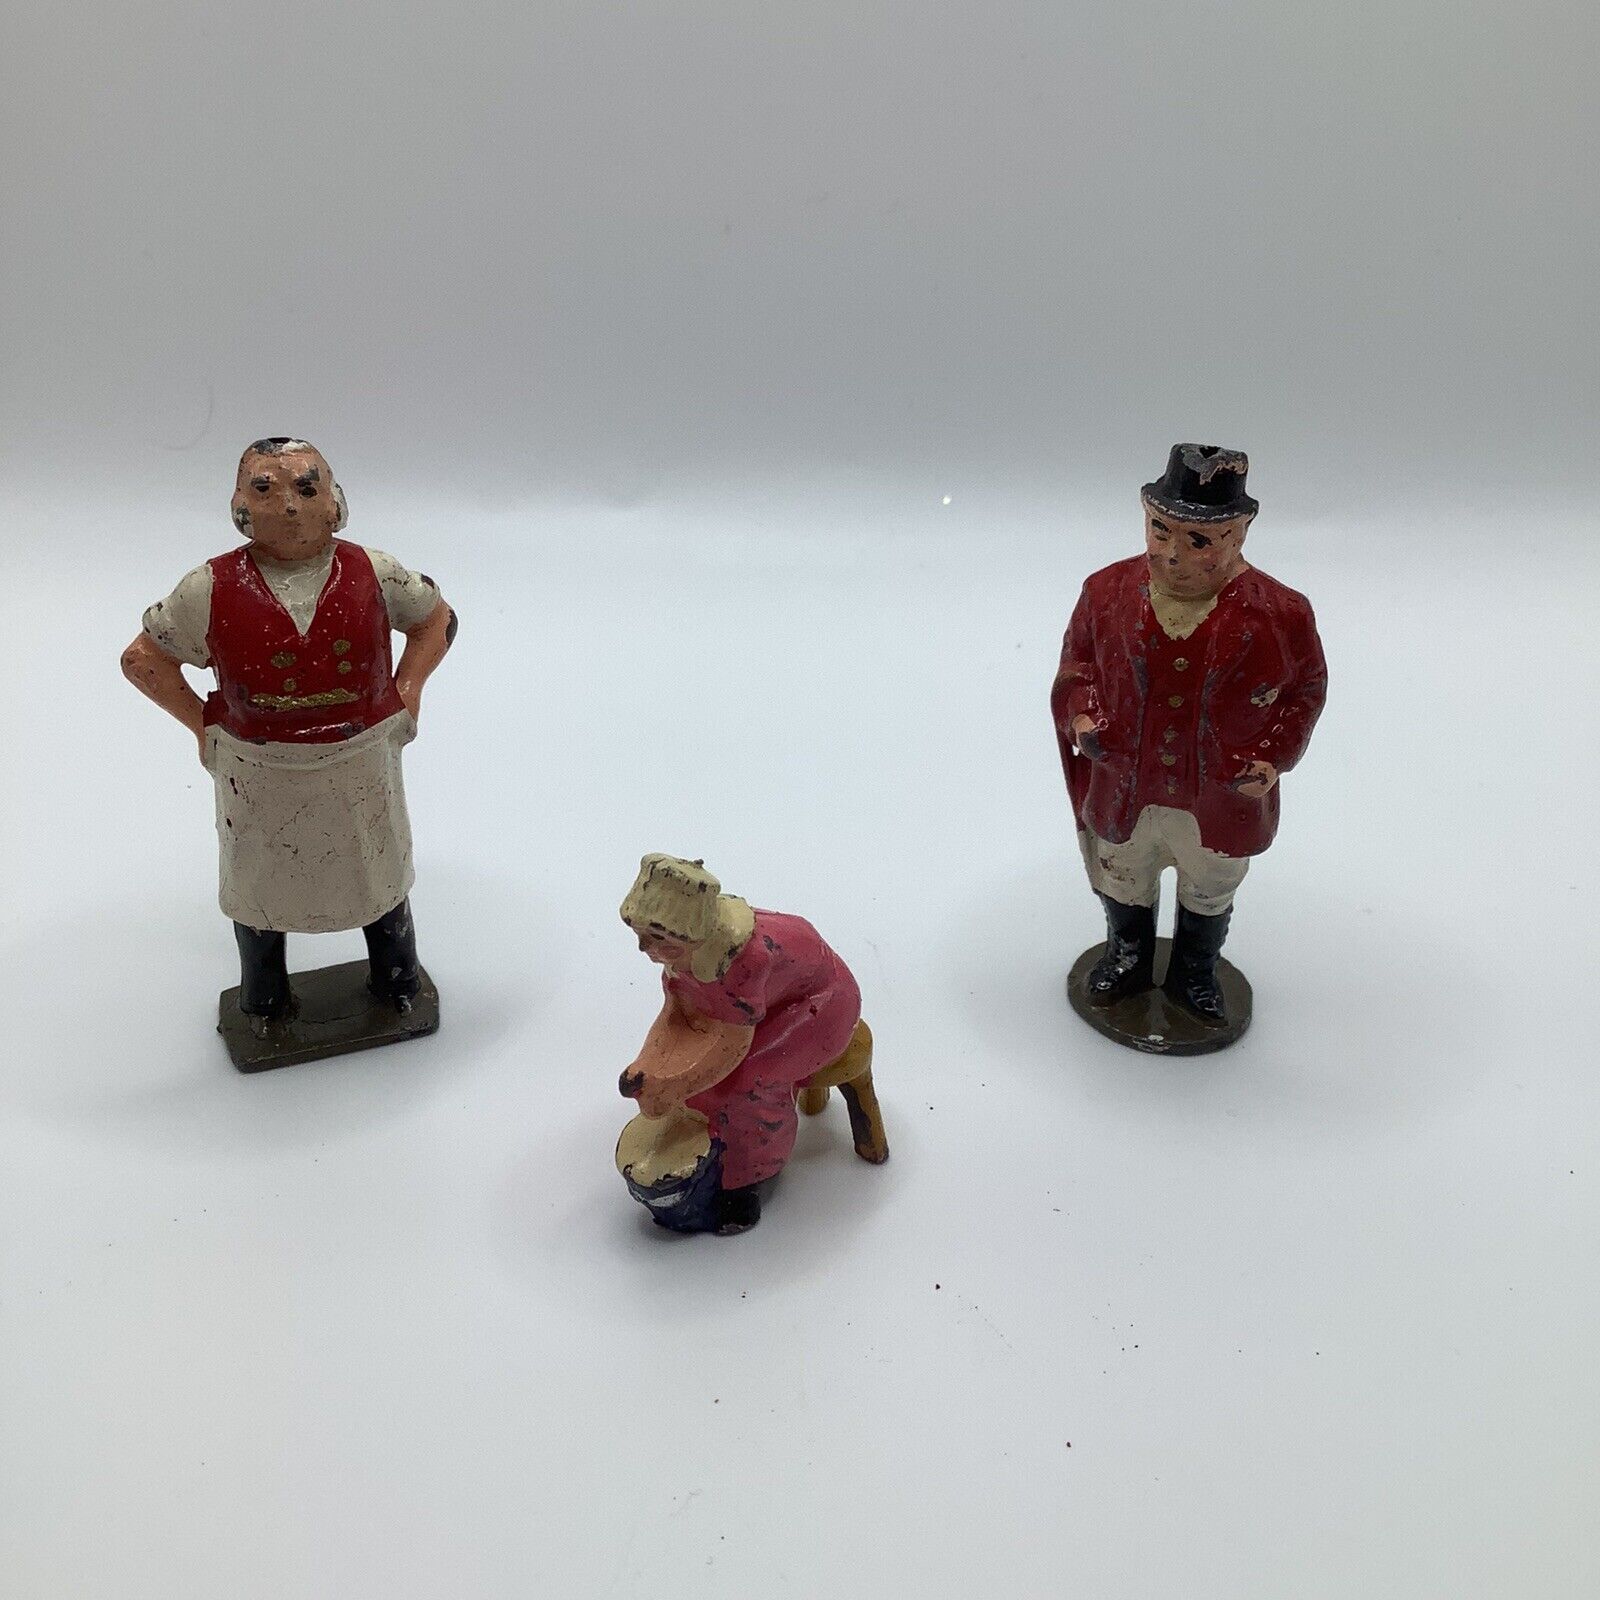 Vintage Casted Metal Handpainted Miniature Figurines Made In England